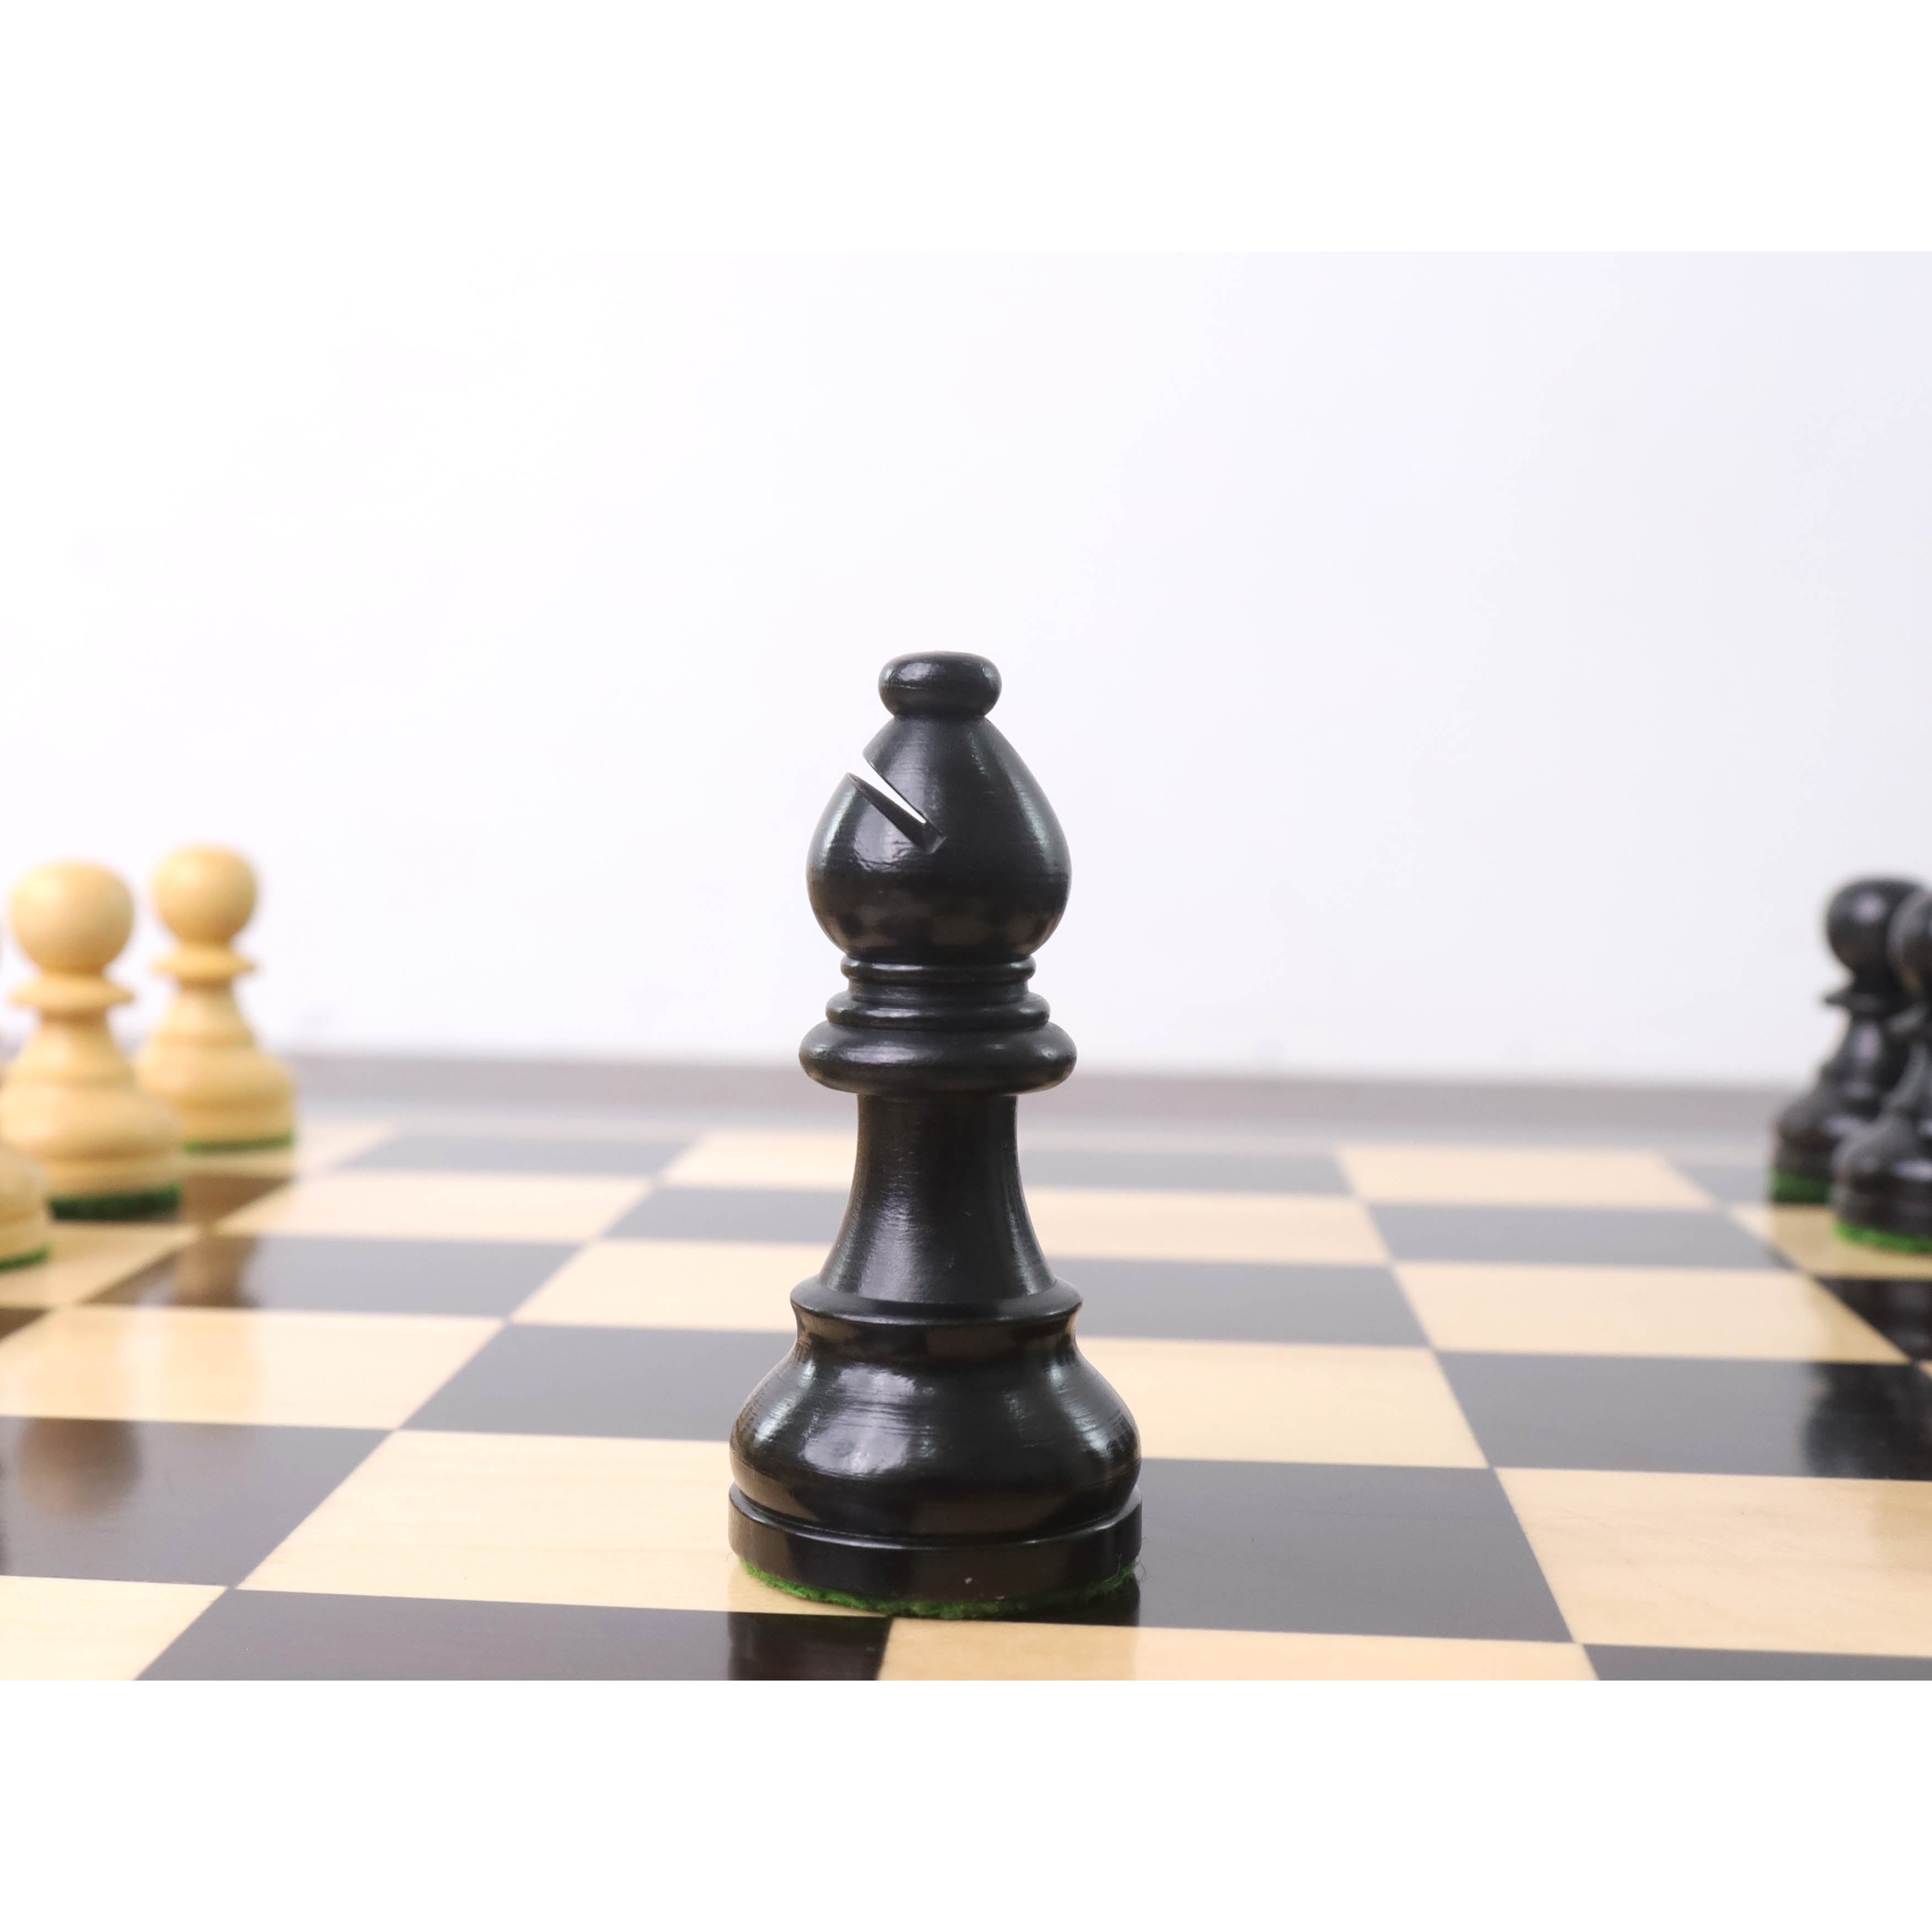 Combo of 3.3" Tournament Staunton Chess Set - Pieces in Ebonised Boxwood with Board and Box